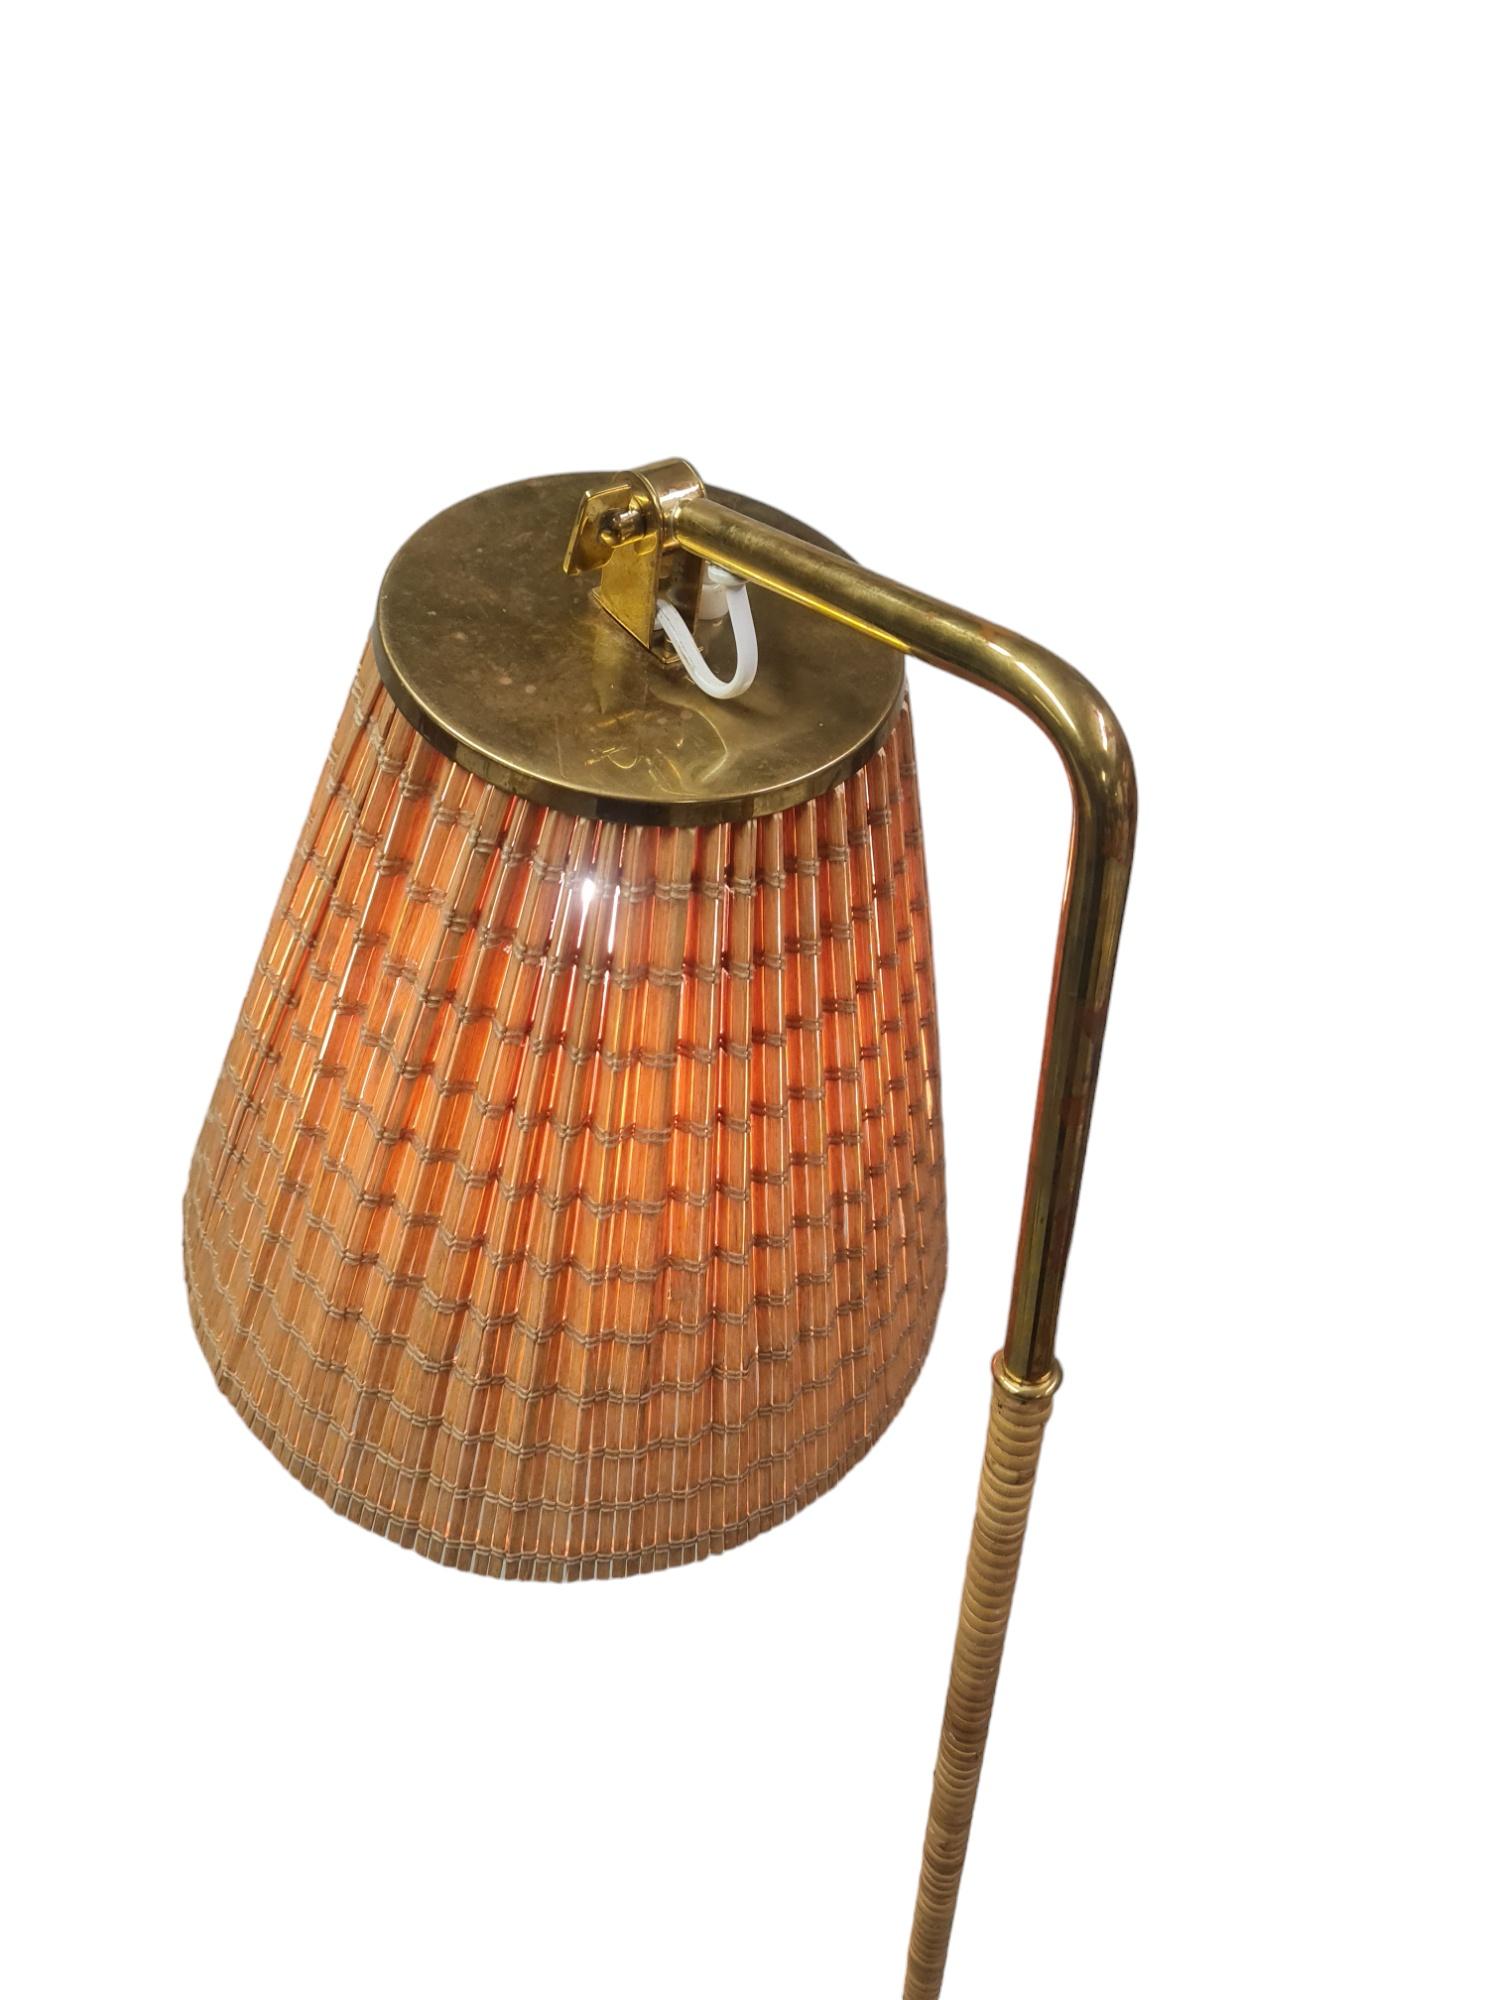 Paavo Tynell Floor Lamp Model 9631, Taito Oy For Sale 4